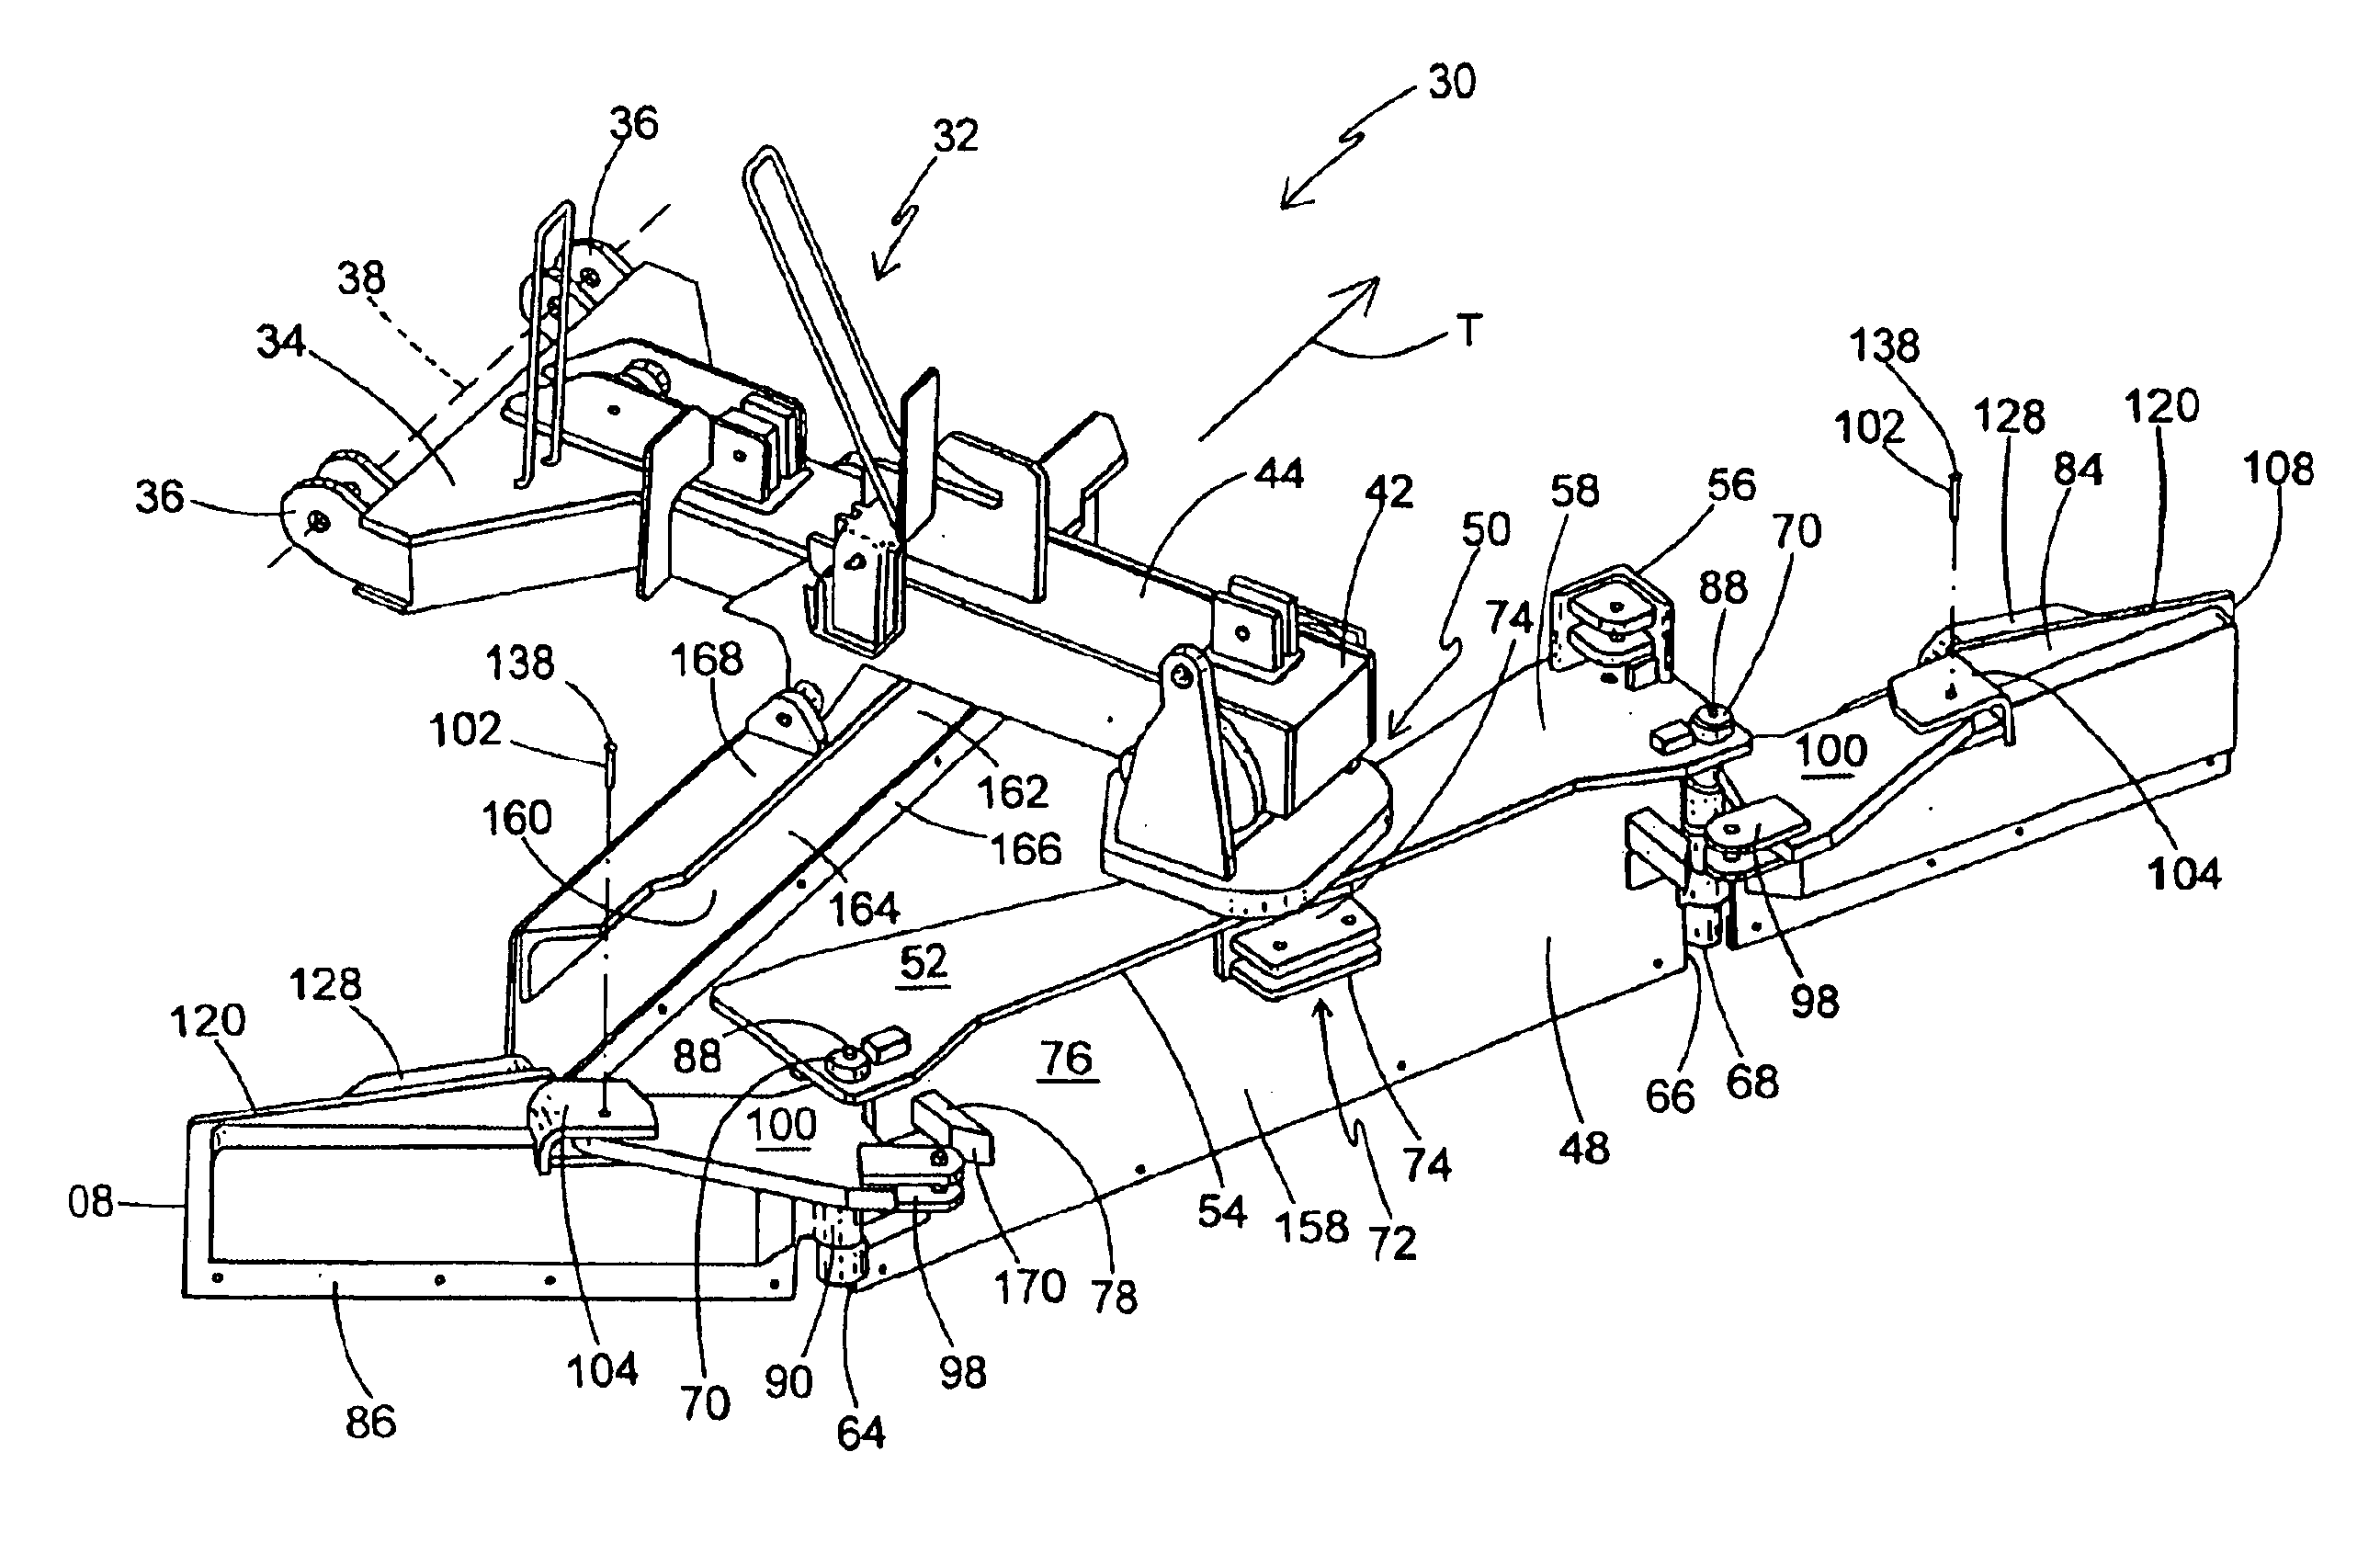 Template door and wing assembly with break-away feature for rail ballast regulator